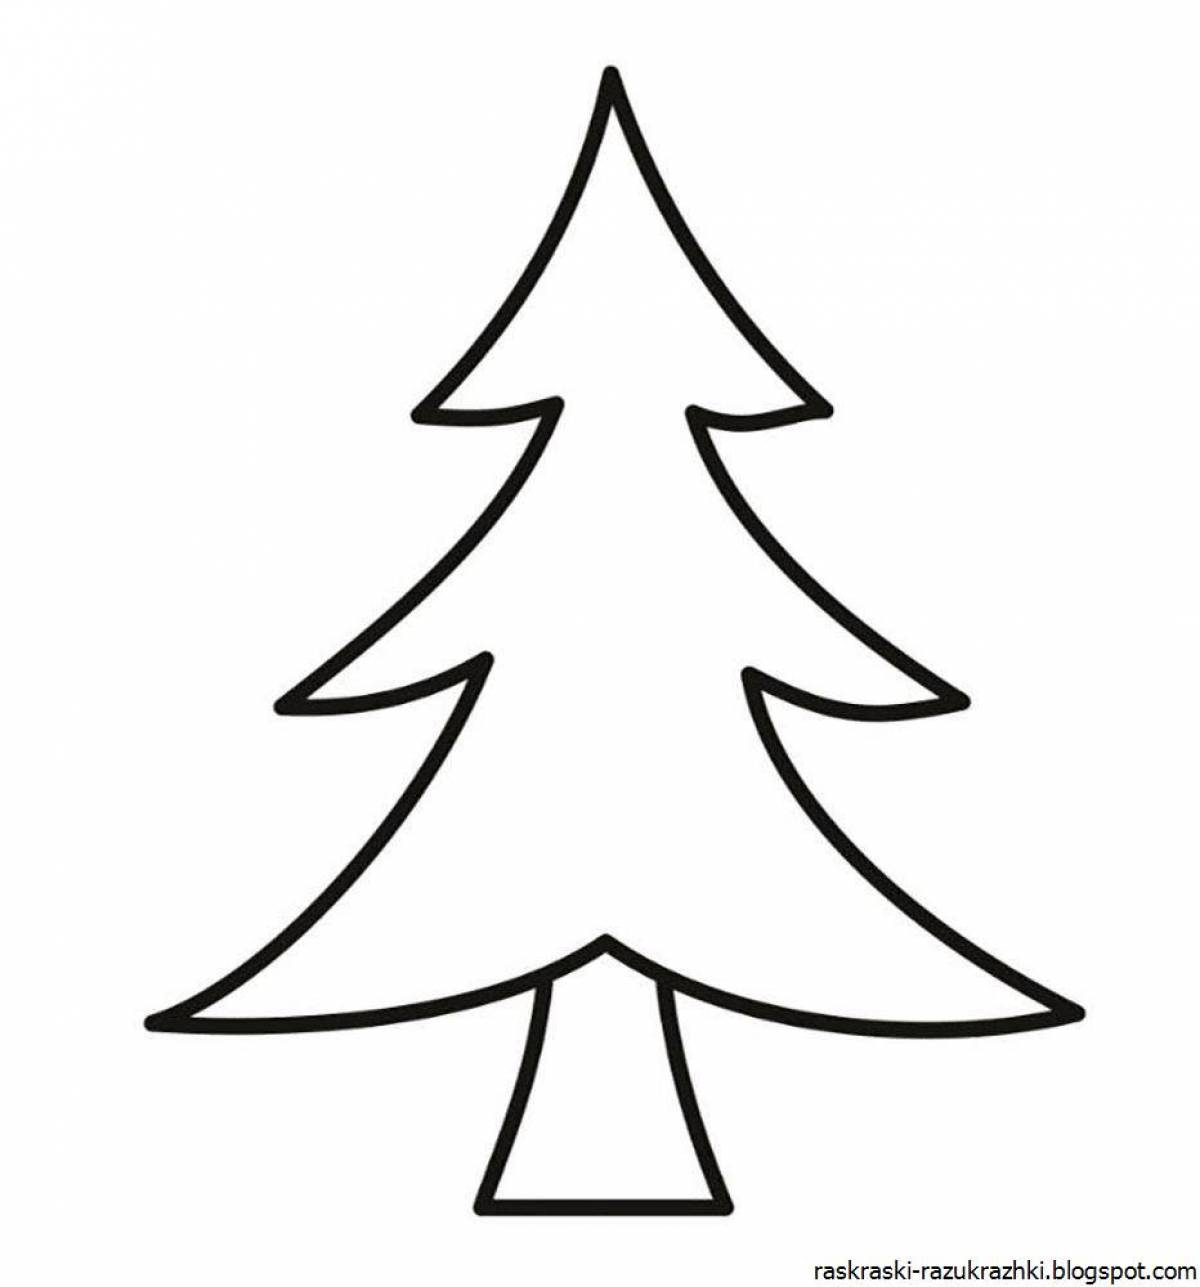 Merry Christmas tree coloring book for 2-3 year olds